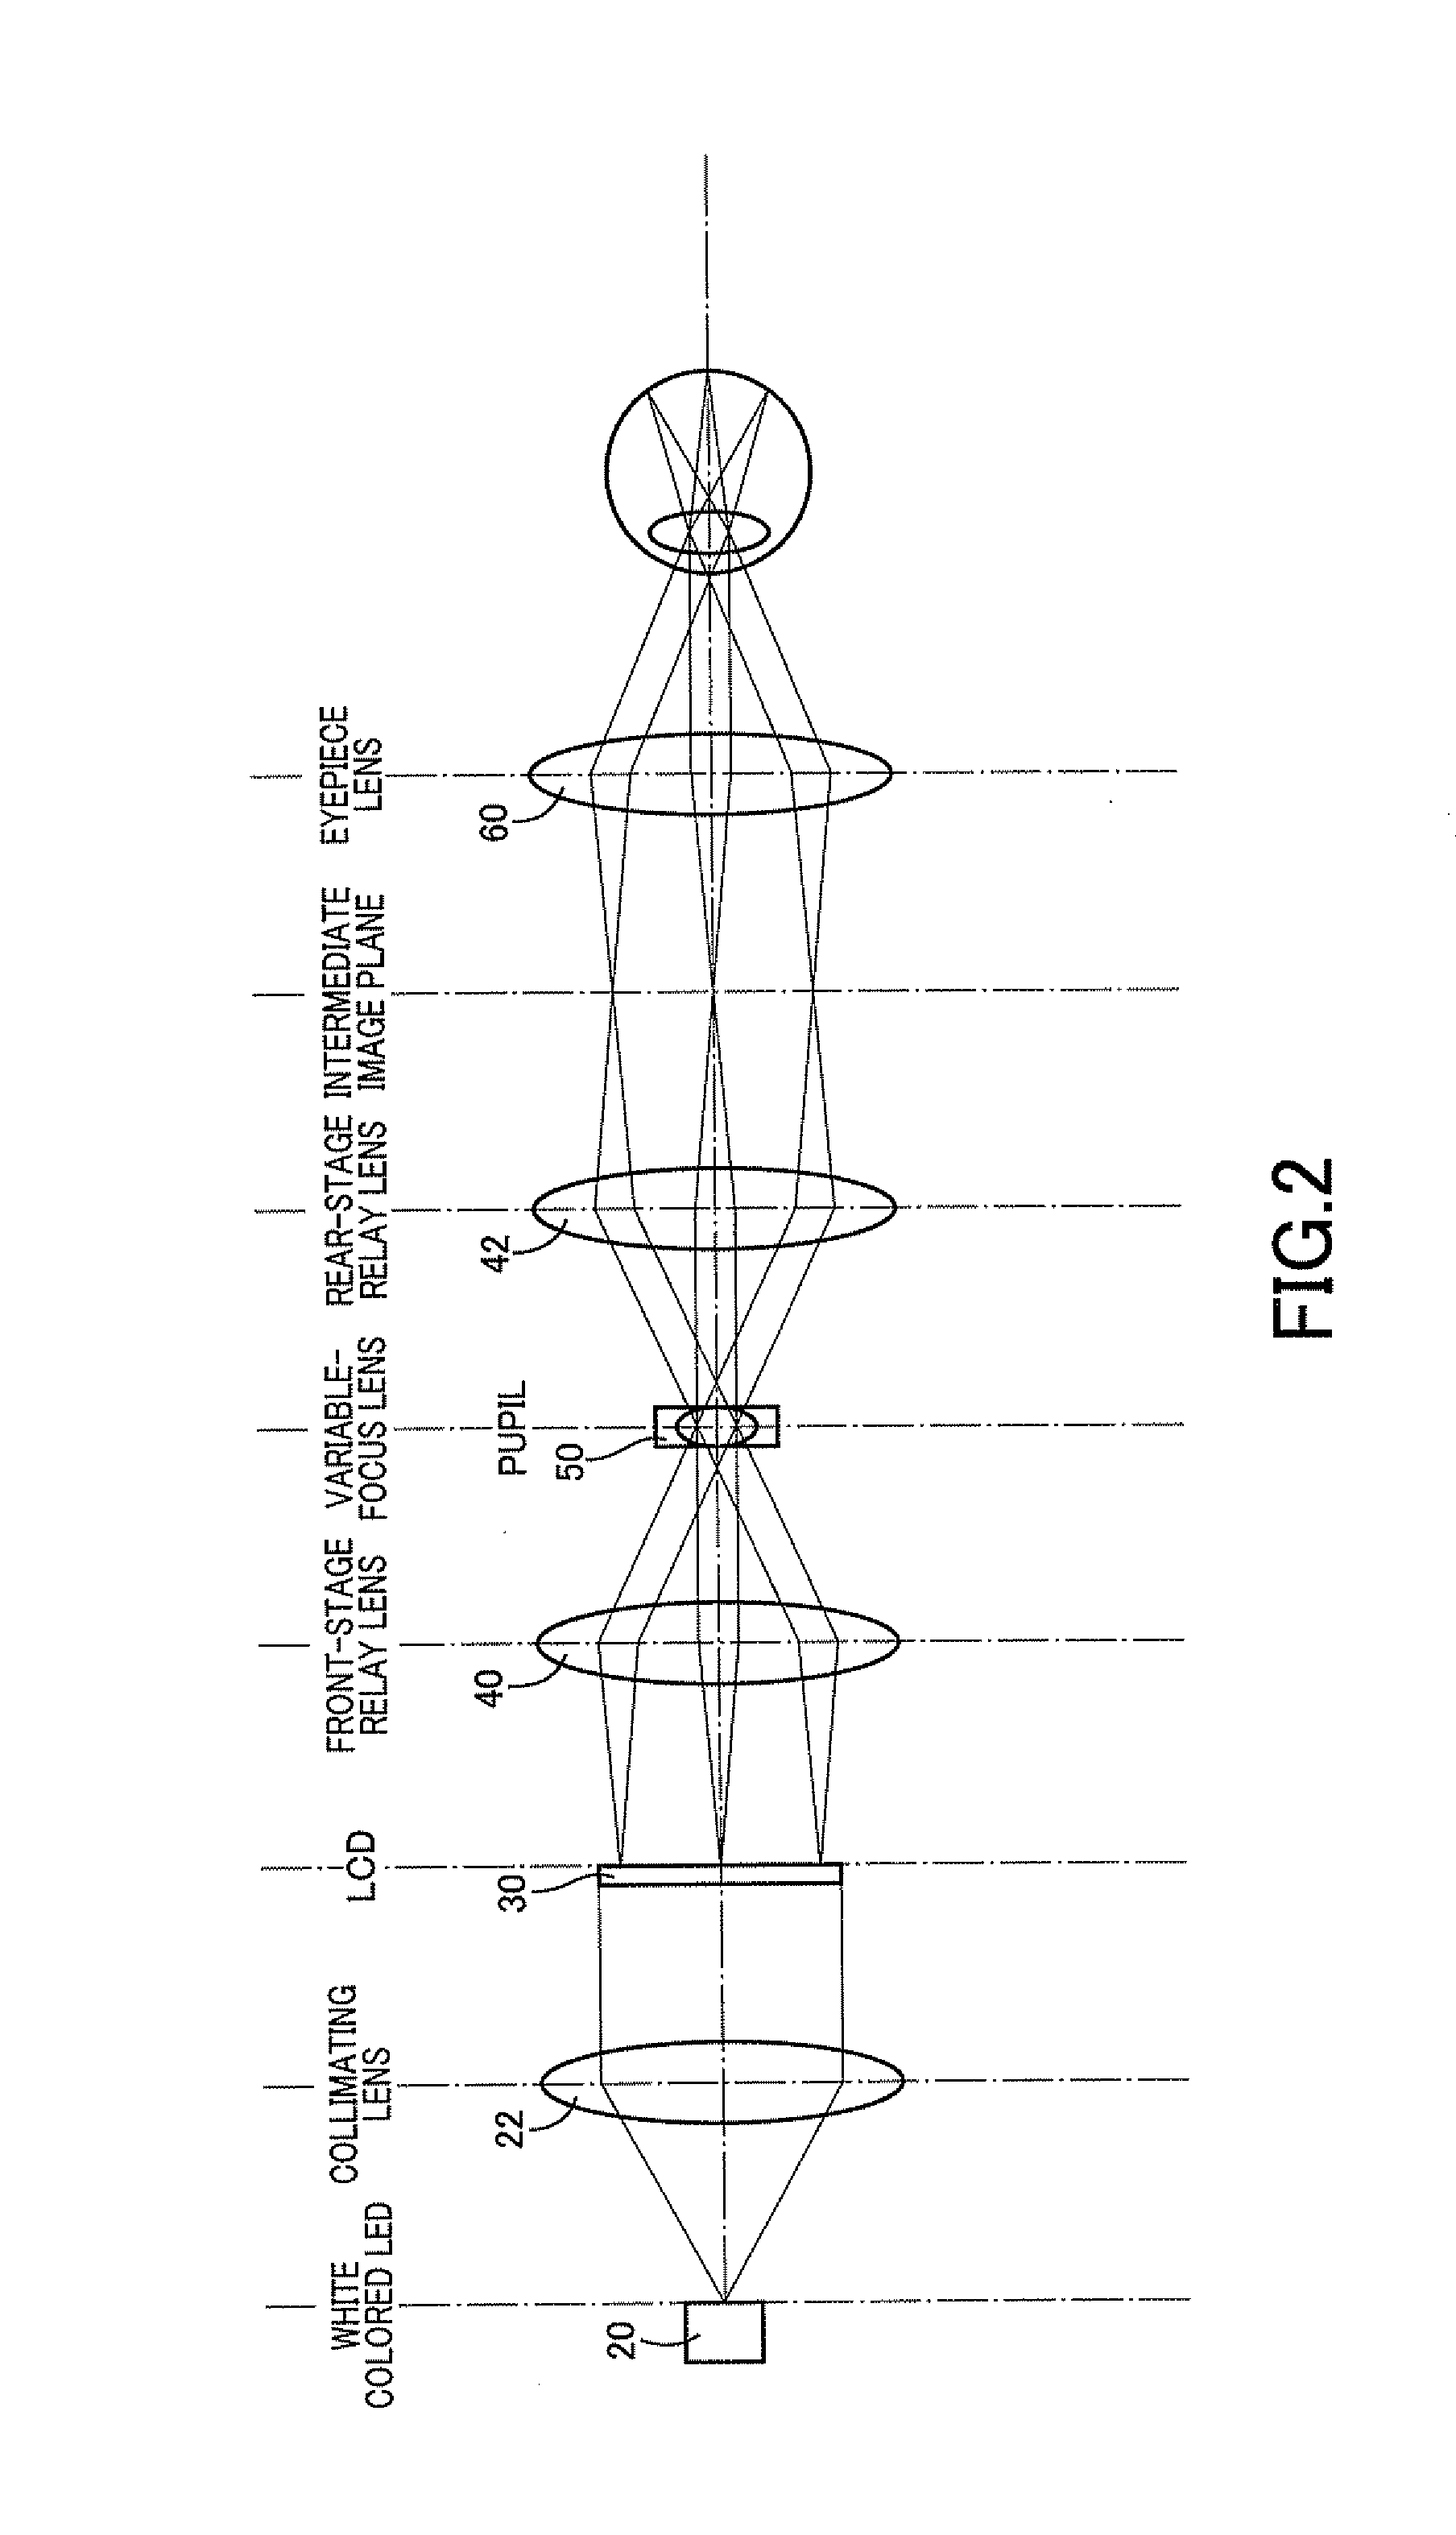 Image display device using variable-focus lens at conjugate image plane